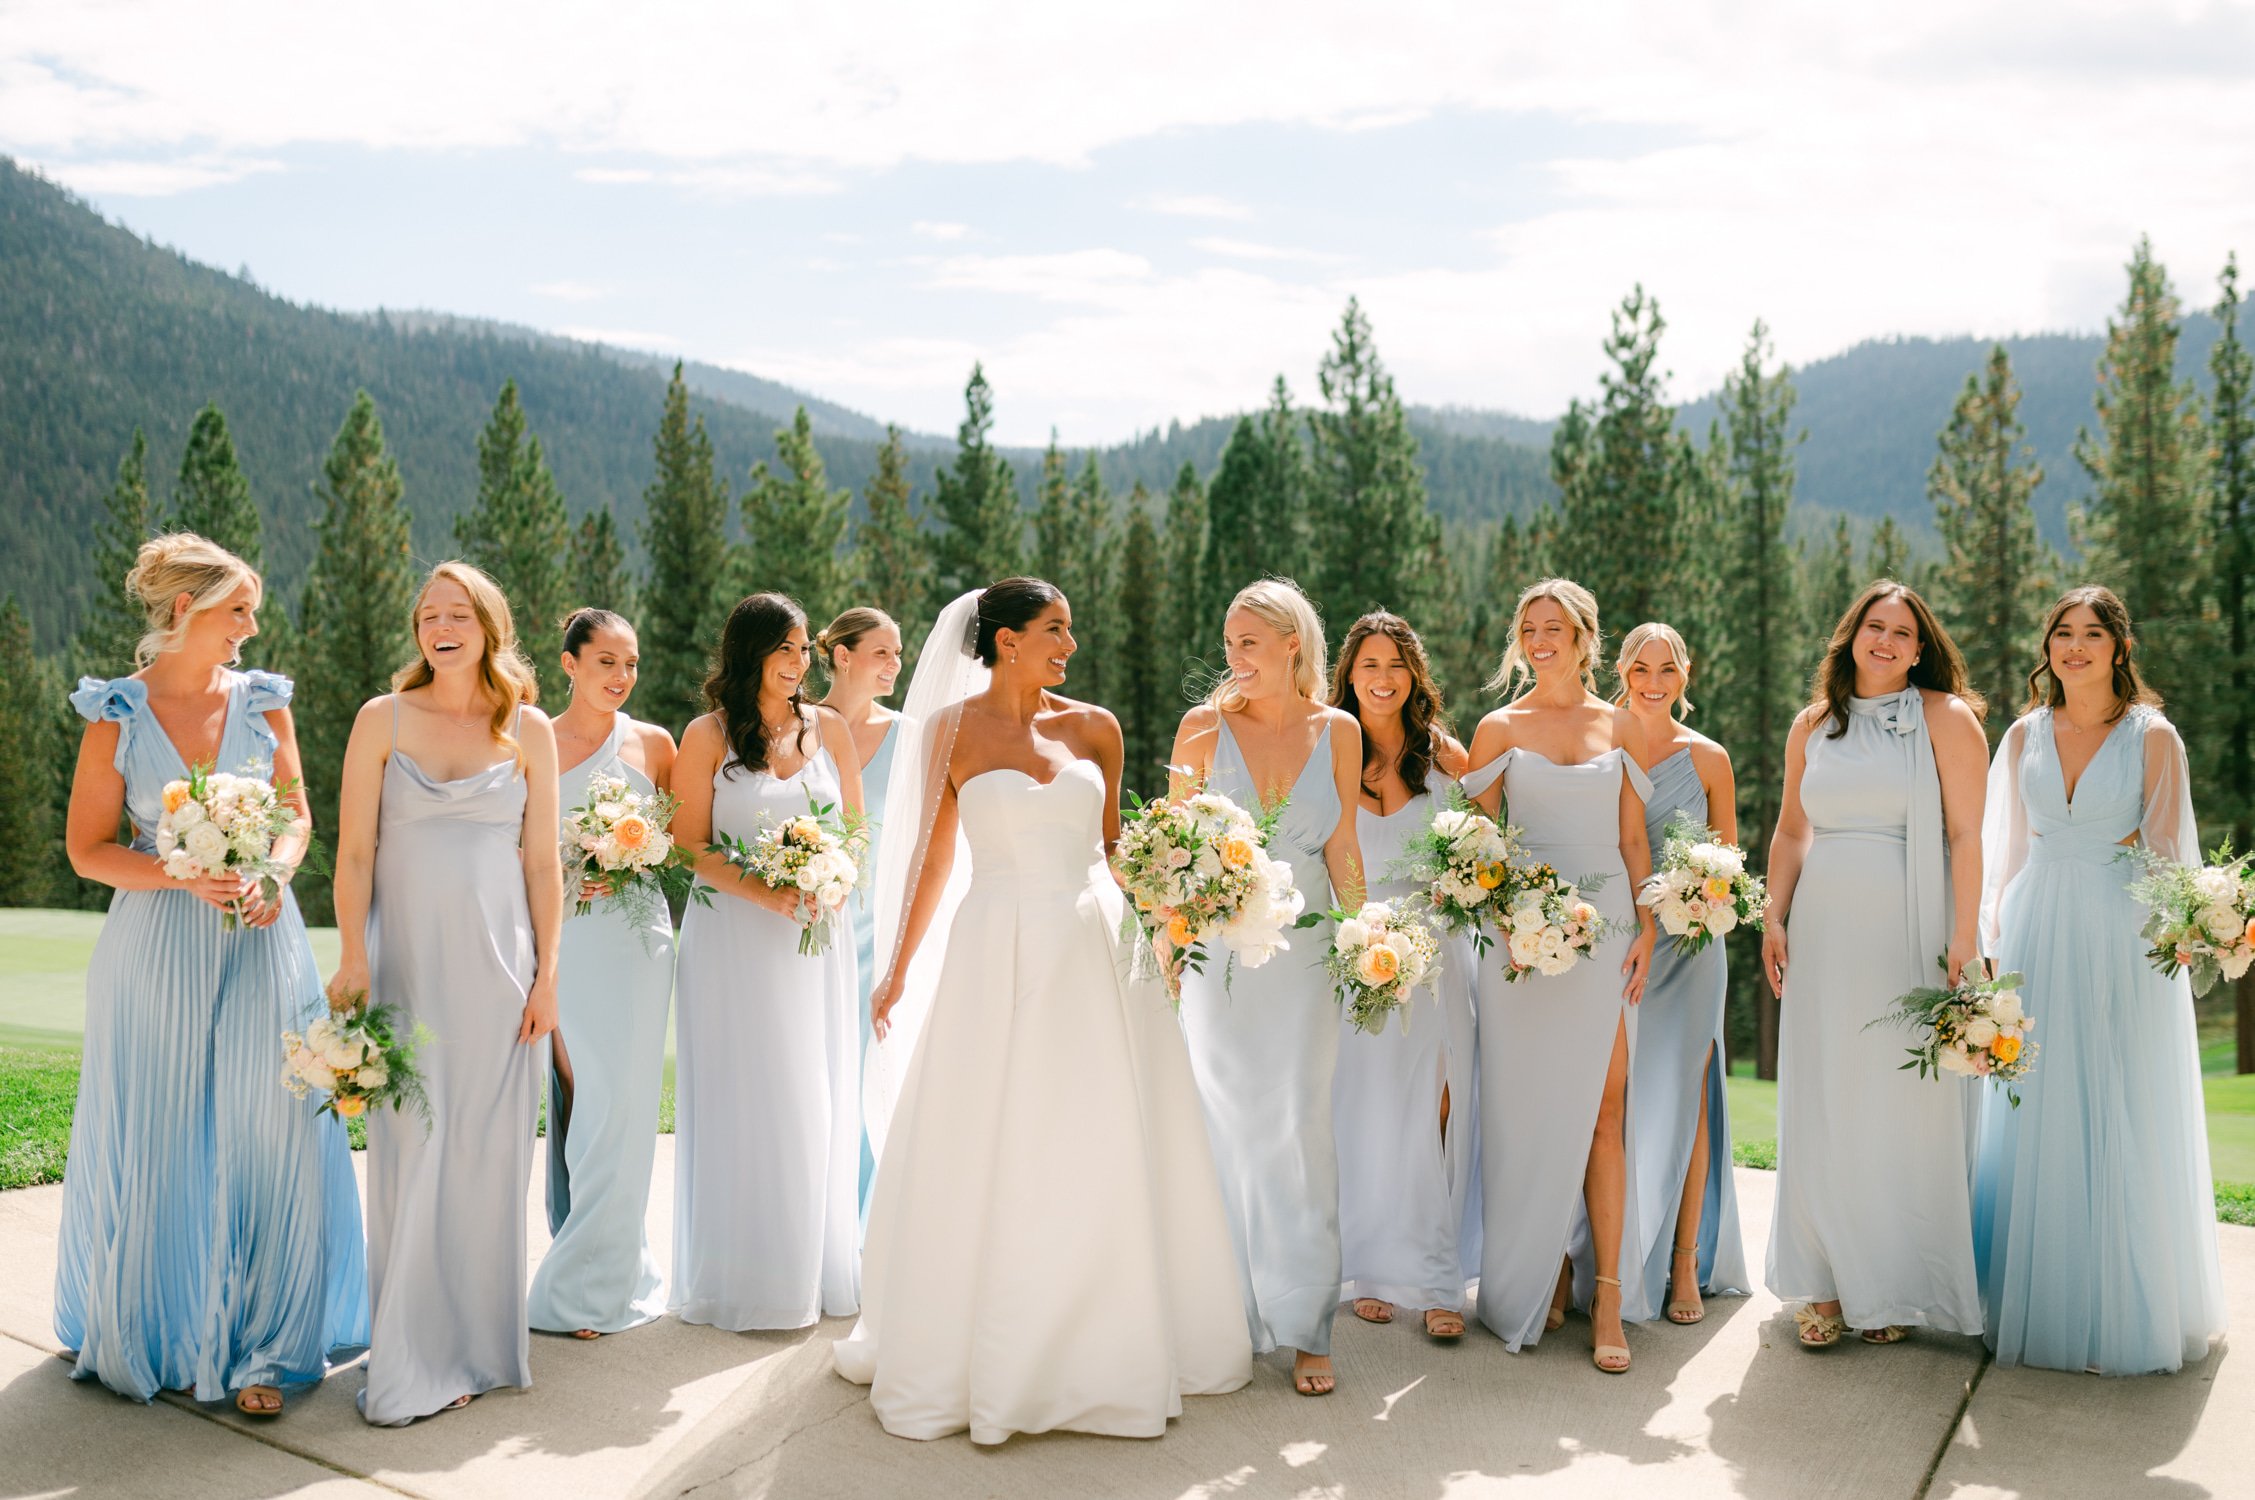 Martis Camp Wedding, photo of the bride with her bridesmaids wearing blue dresses